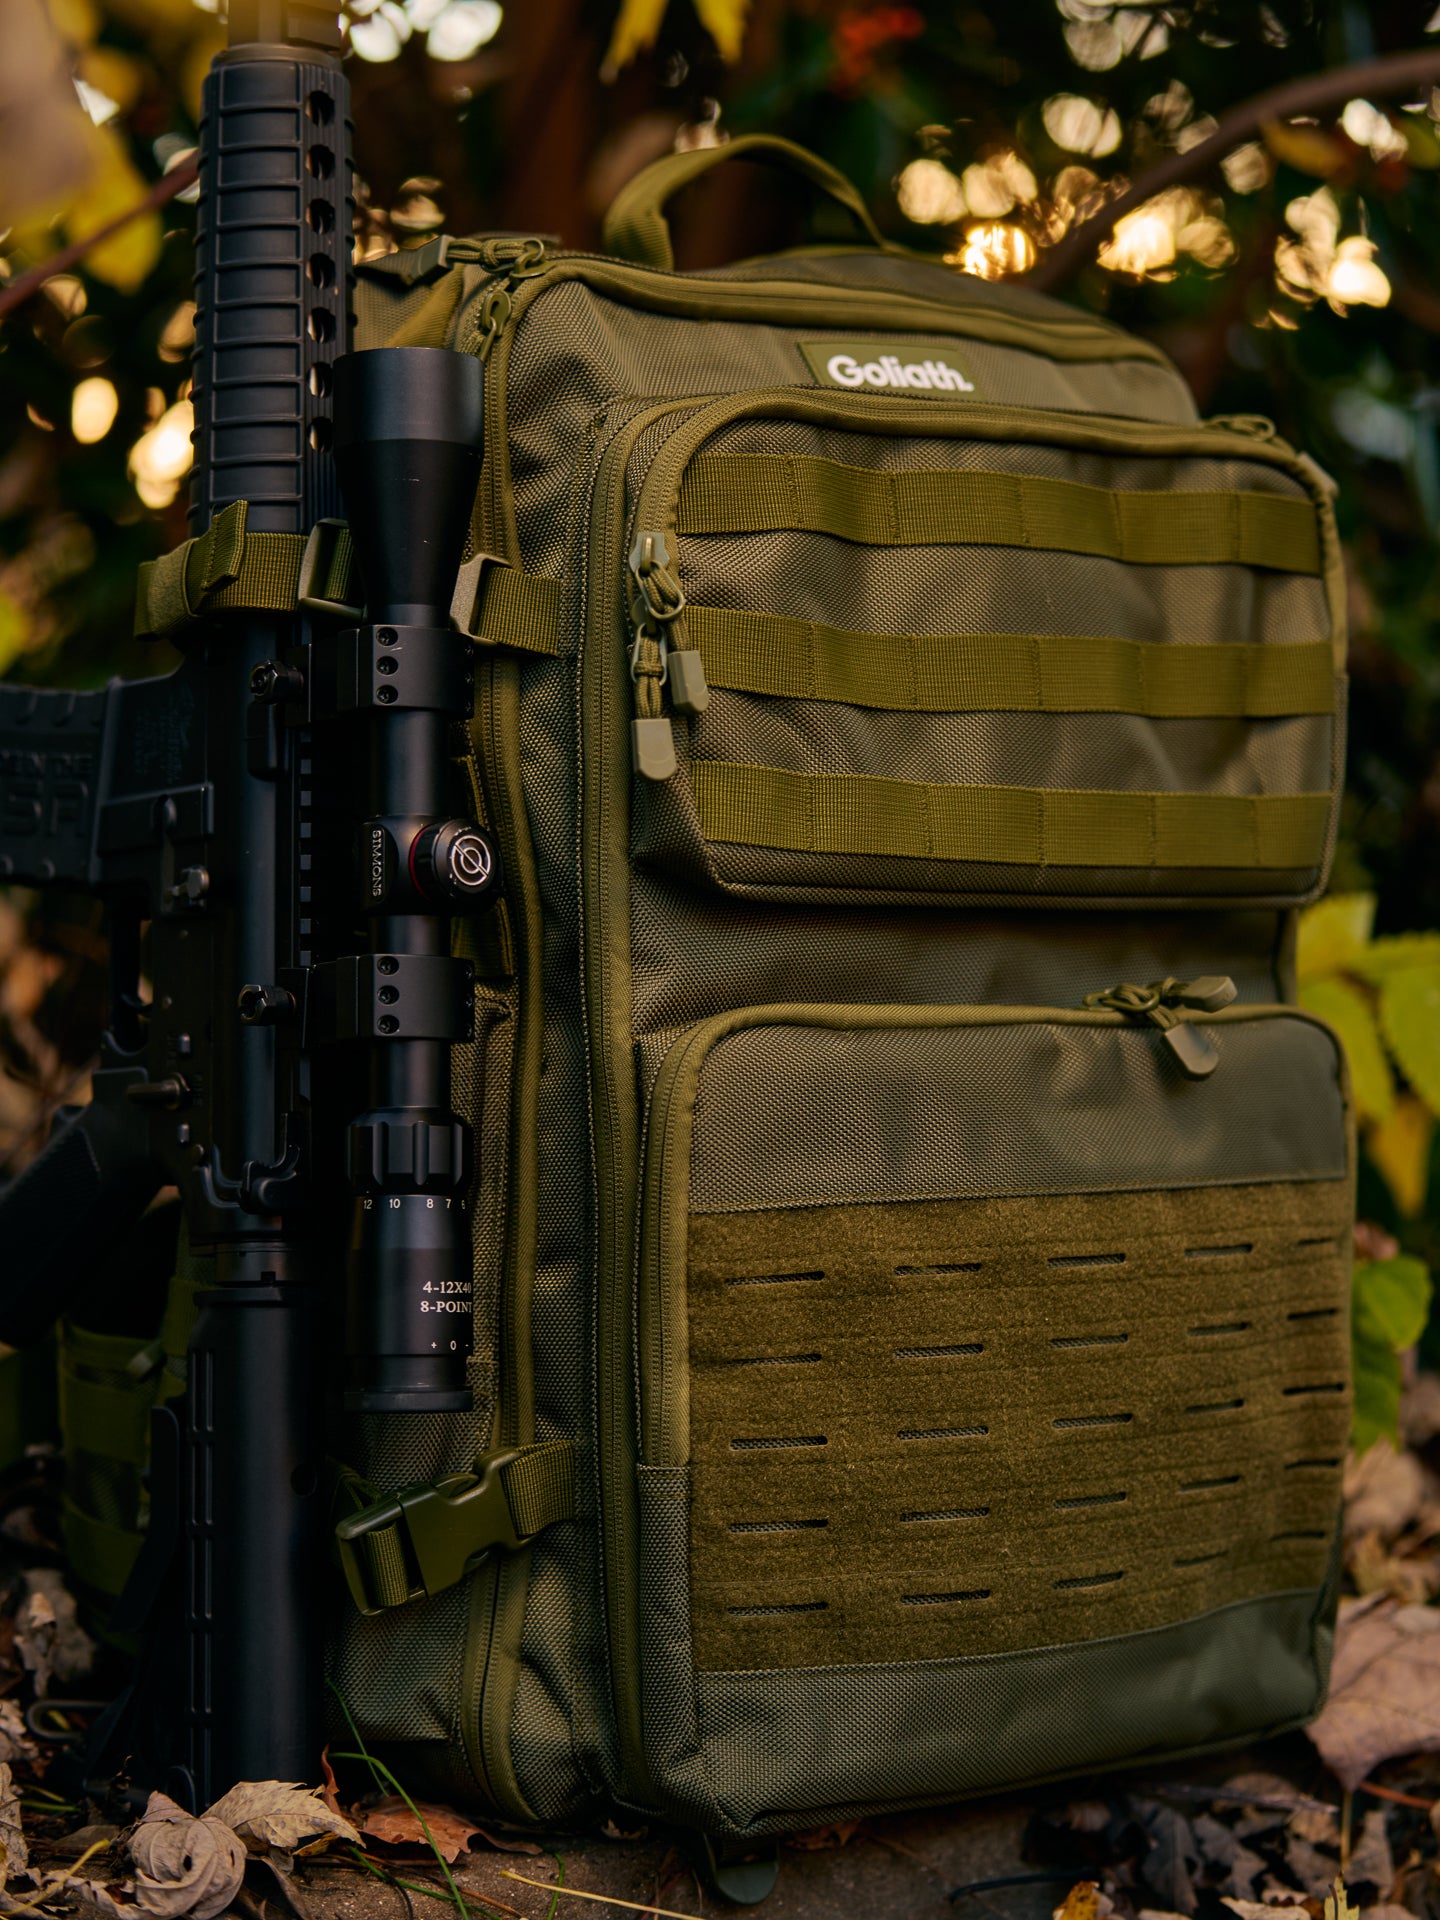 Army green goliath backpack with rifle attached